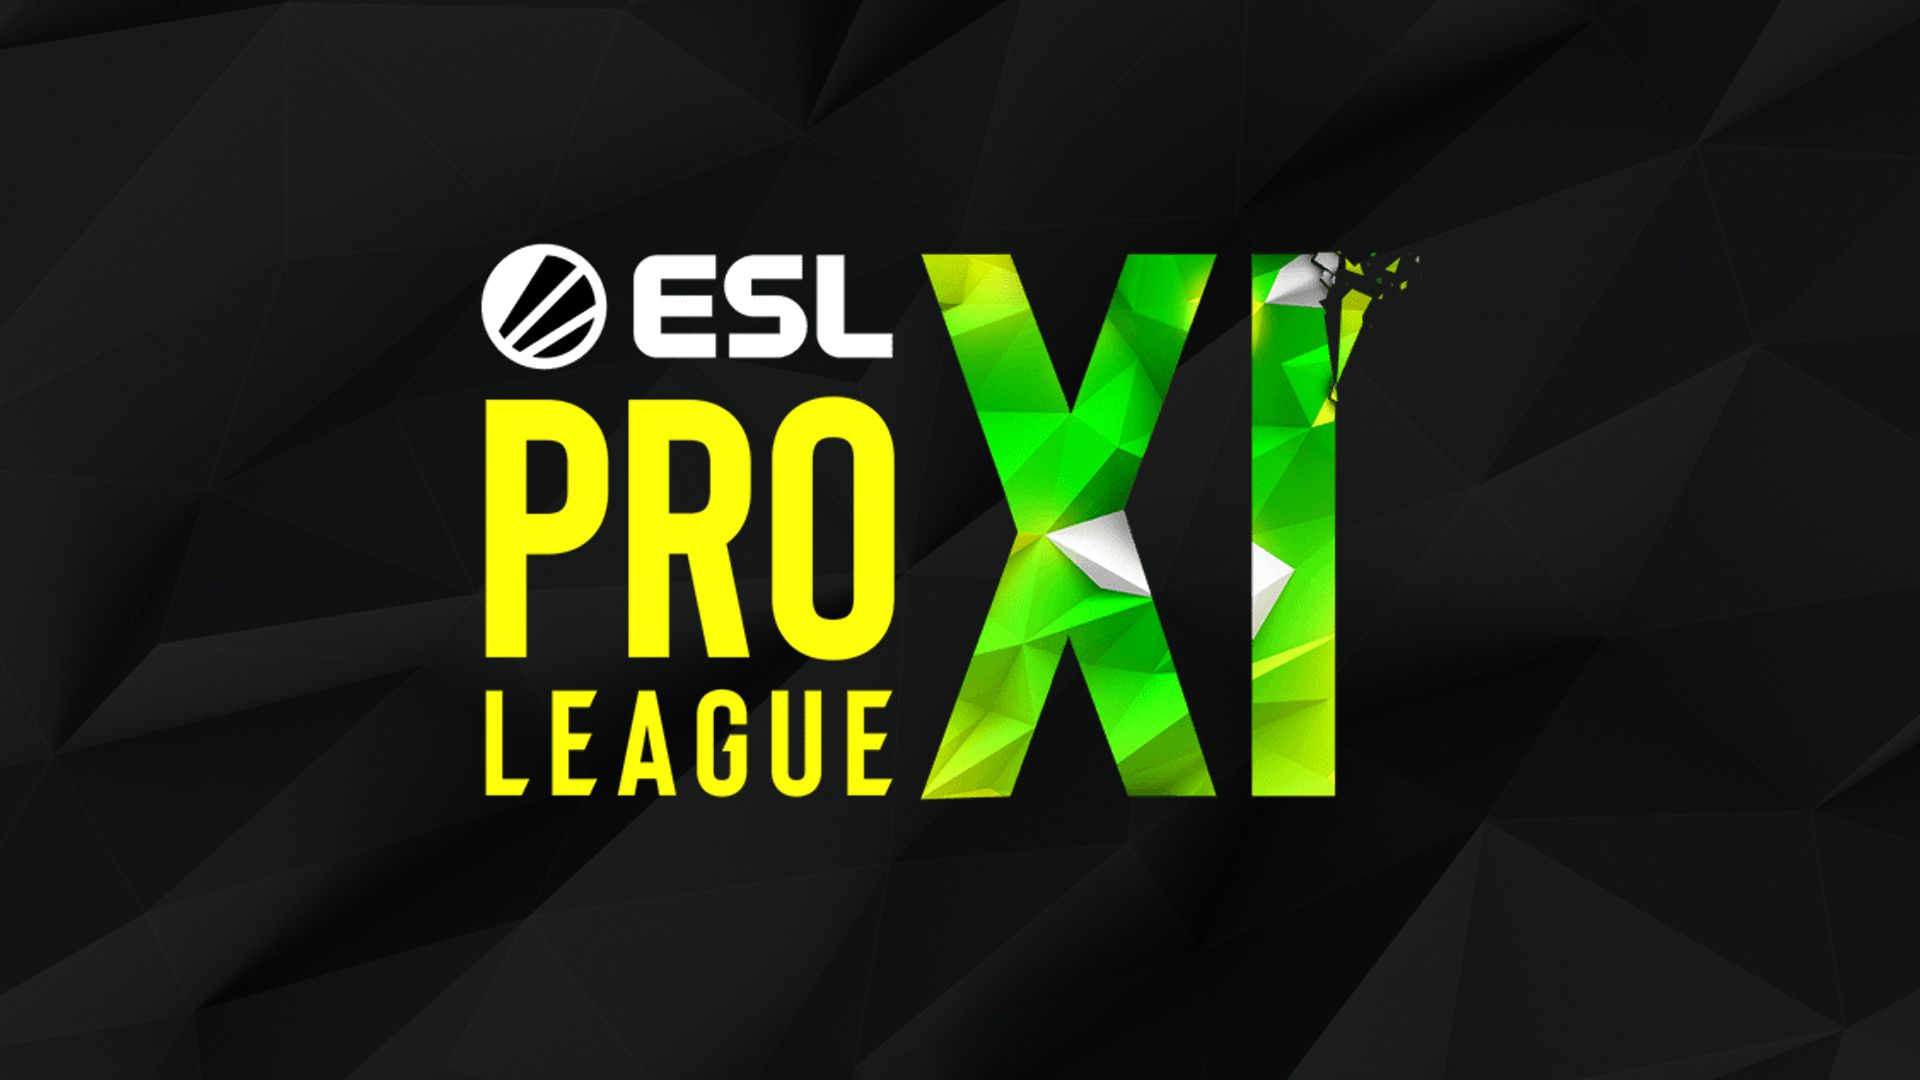 ESL Pro League to be played online due to COVID-19